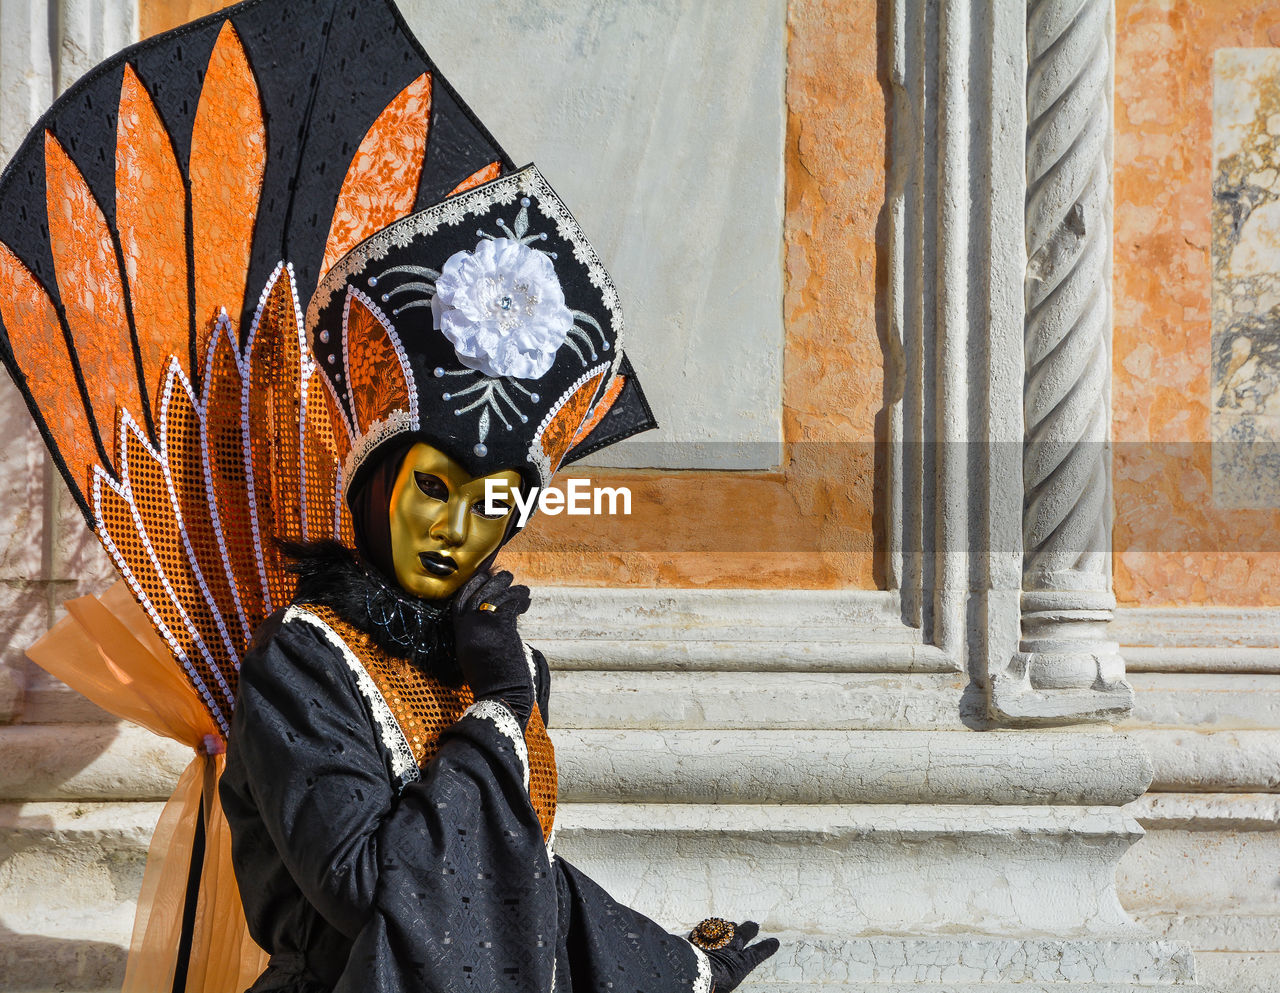 Portrait of person dressed up for carnival against wall